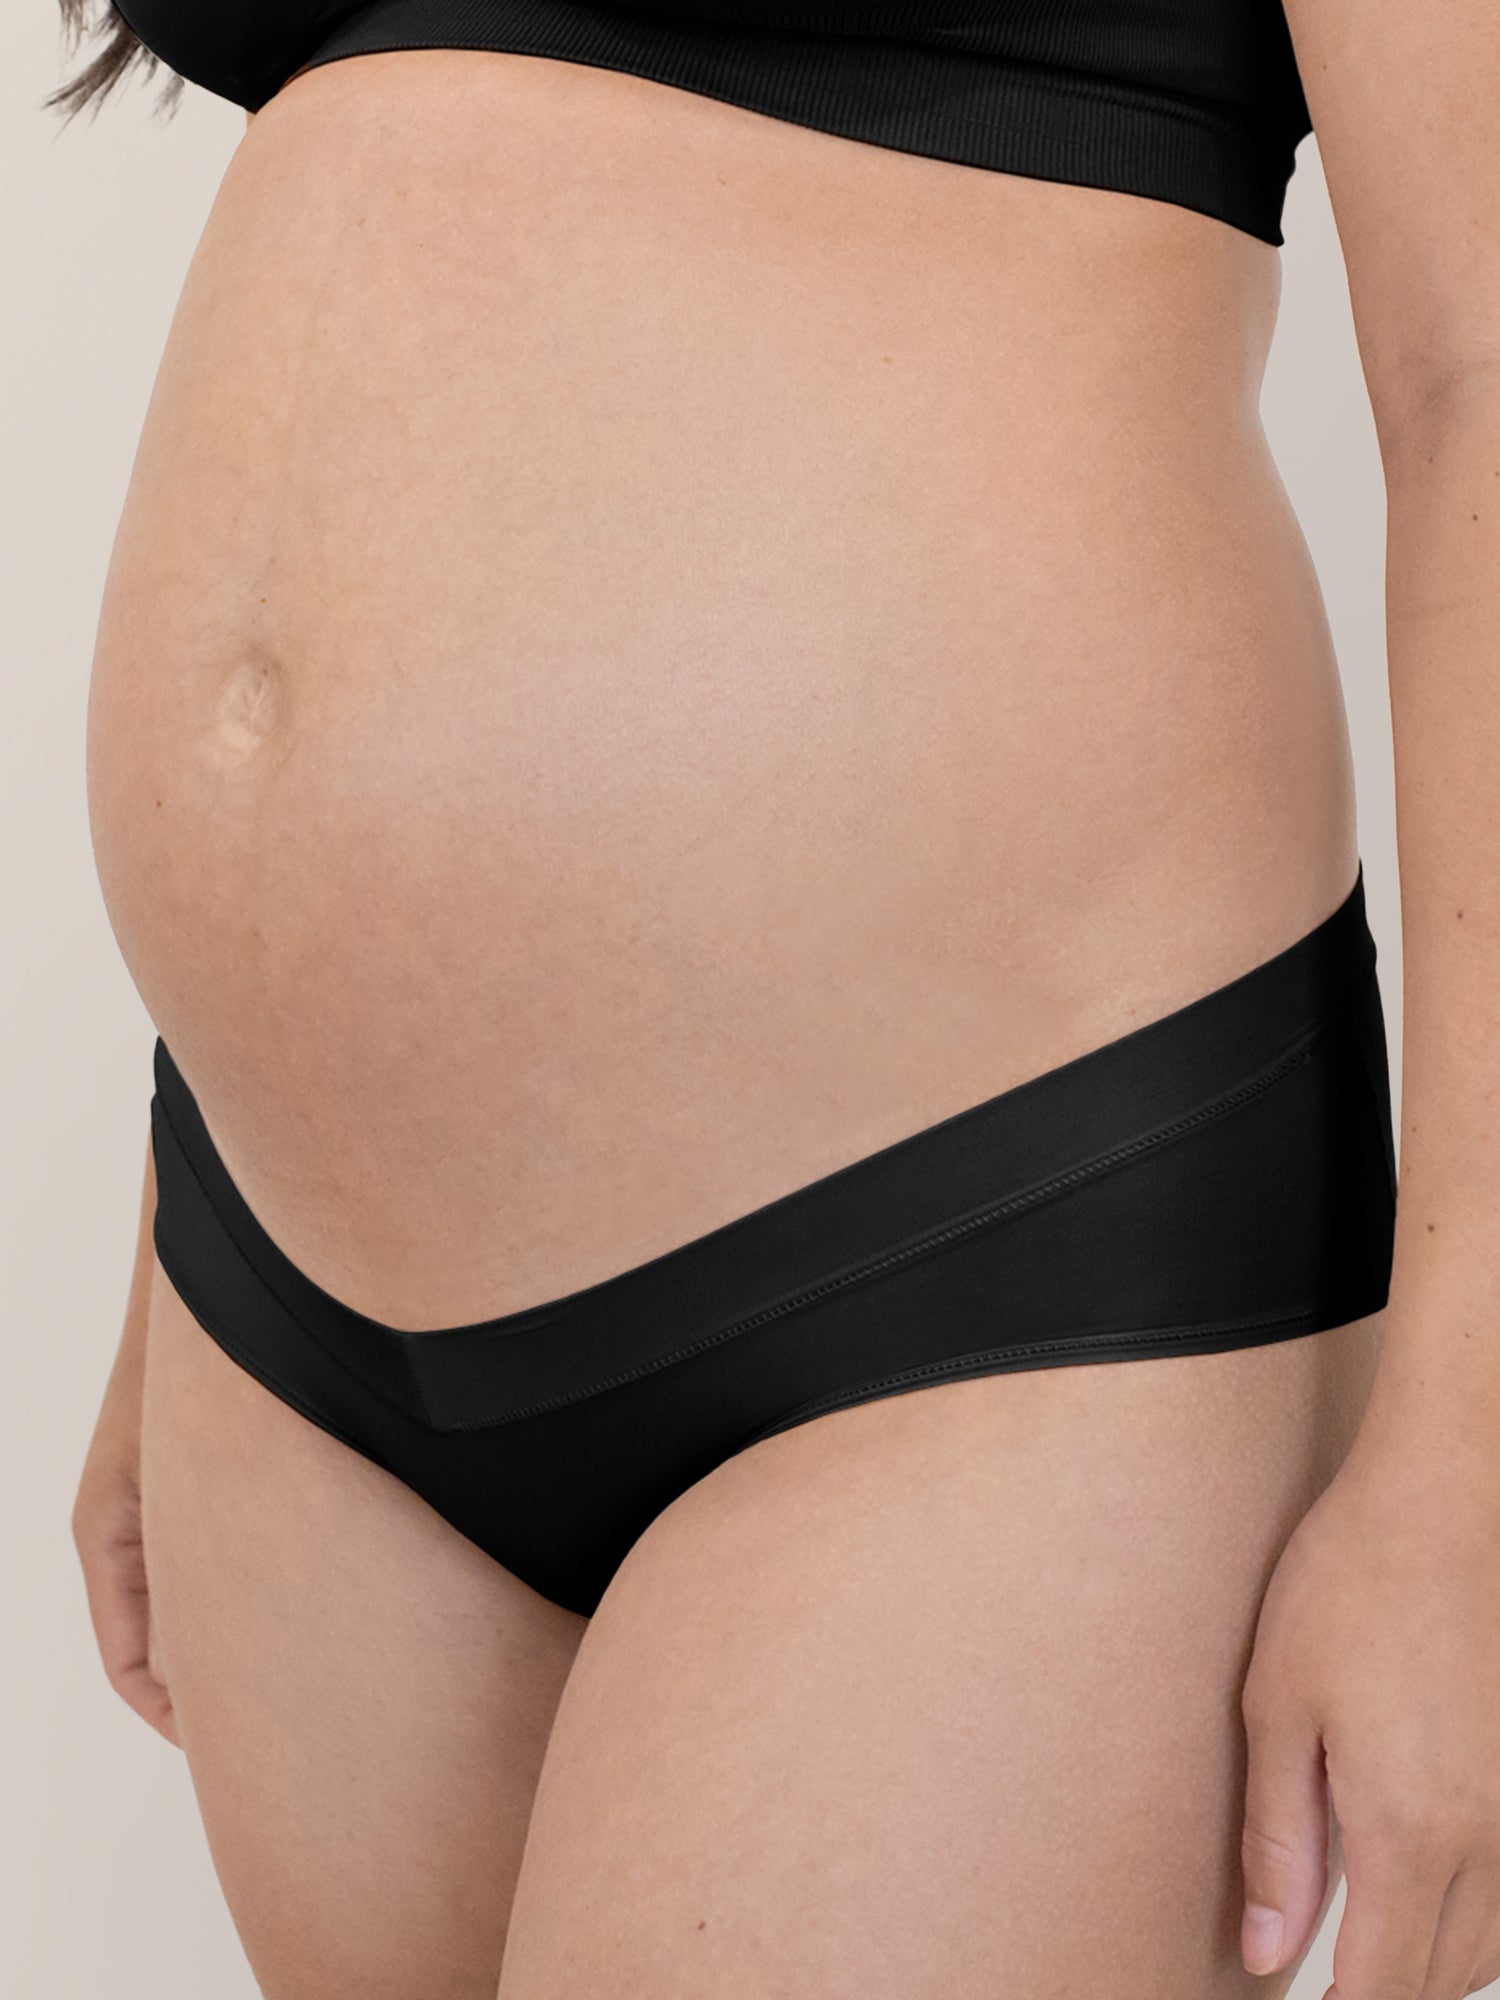 Postnatal Support Brief in beige, Maternity, Active Truth